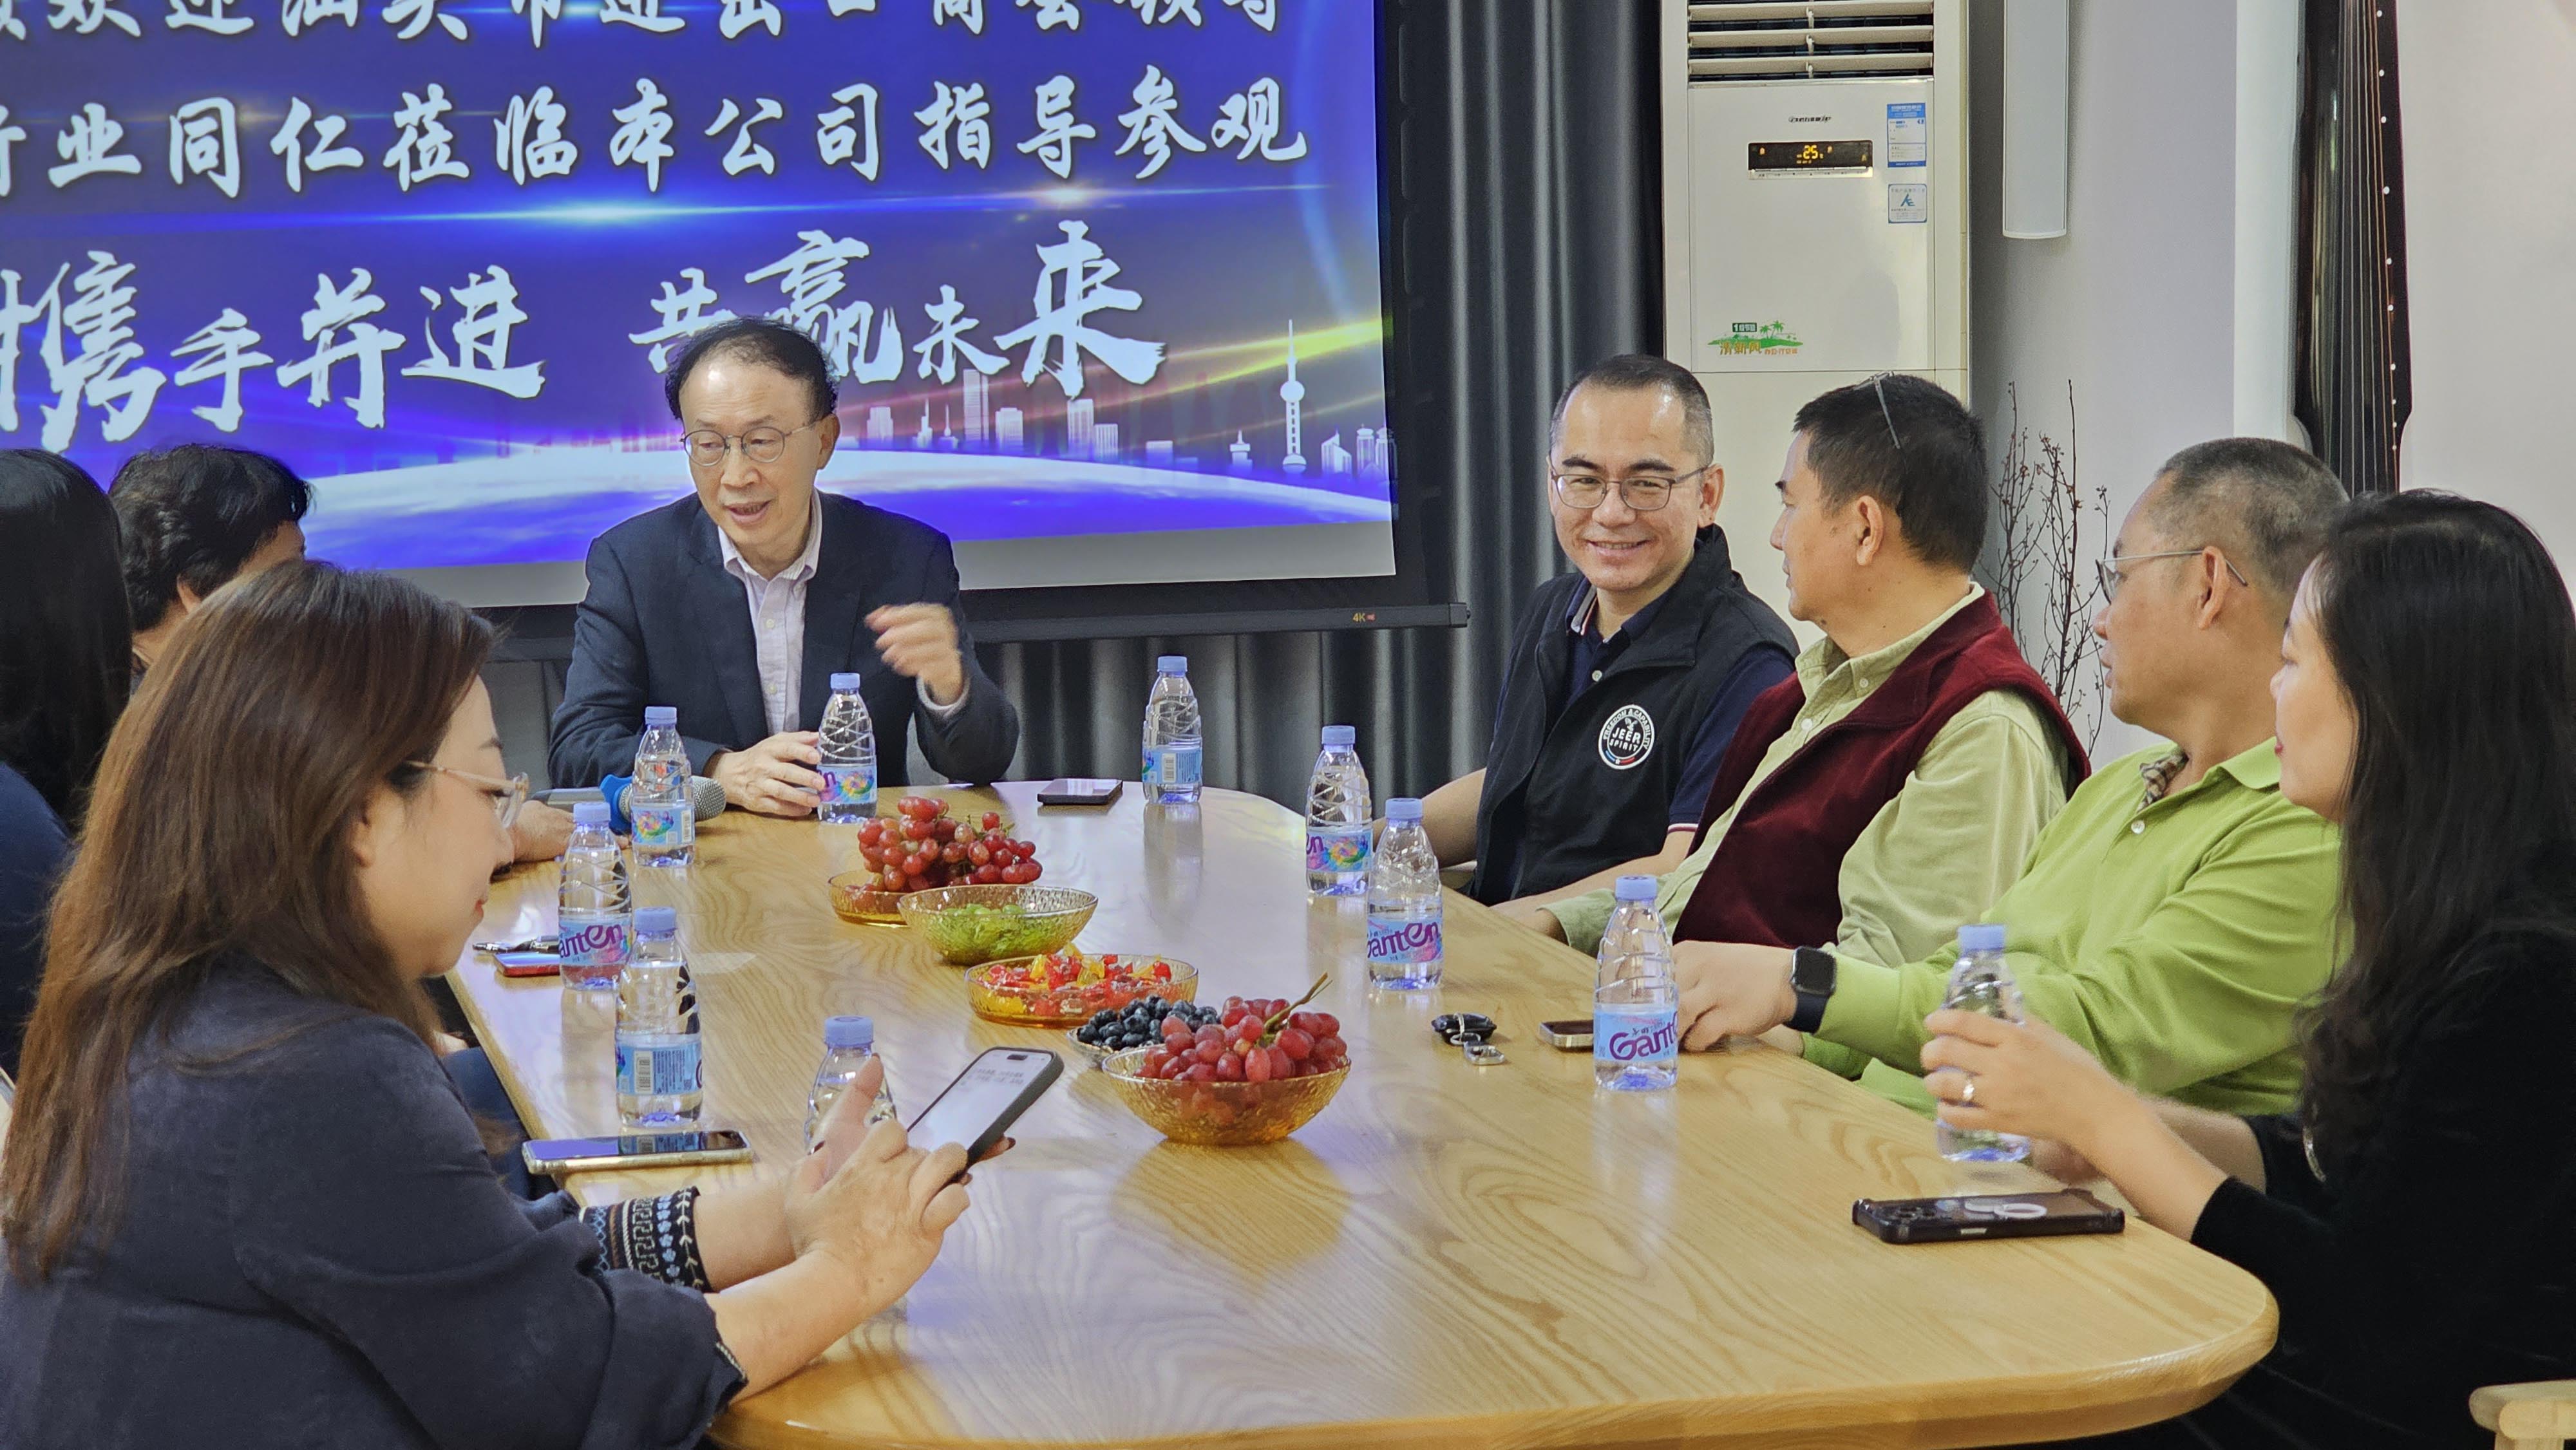 Shantou Business Association Leaders Conduct Inspection and Tour at Yidaxing